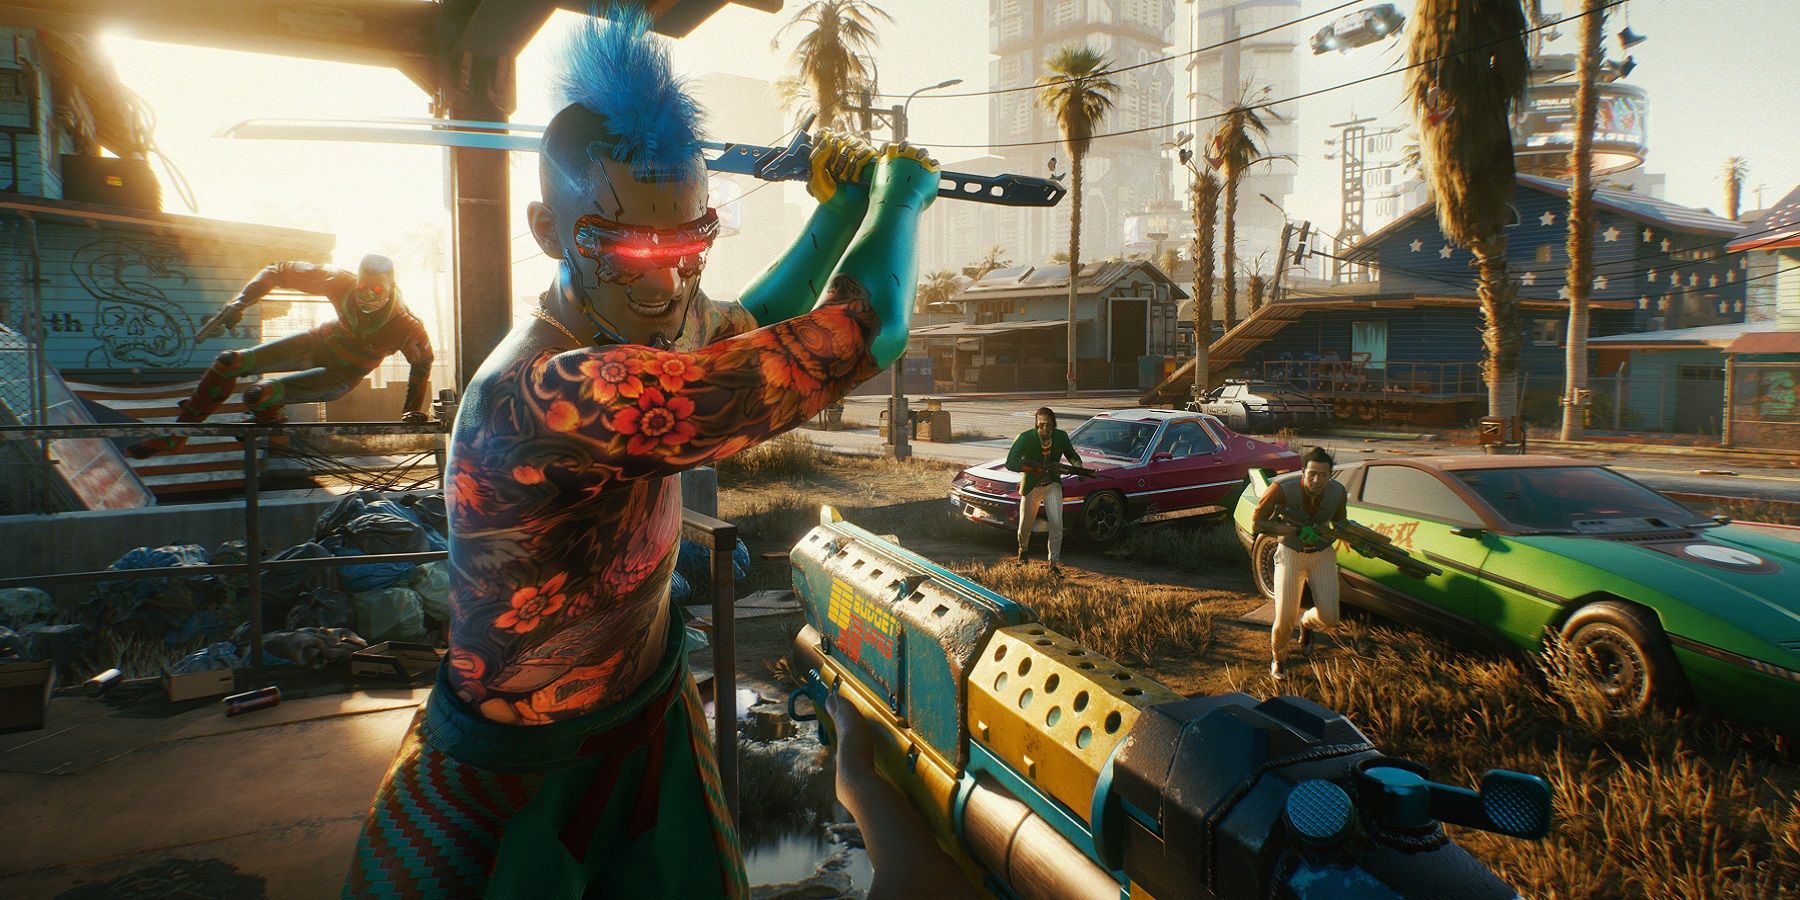 Image from Cyberpunk 2077 showing V about to be attacked by some street thugs.